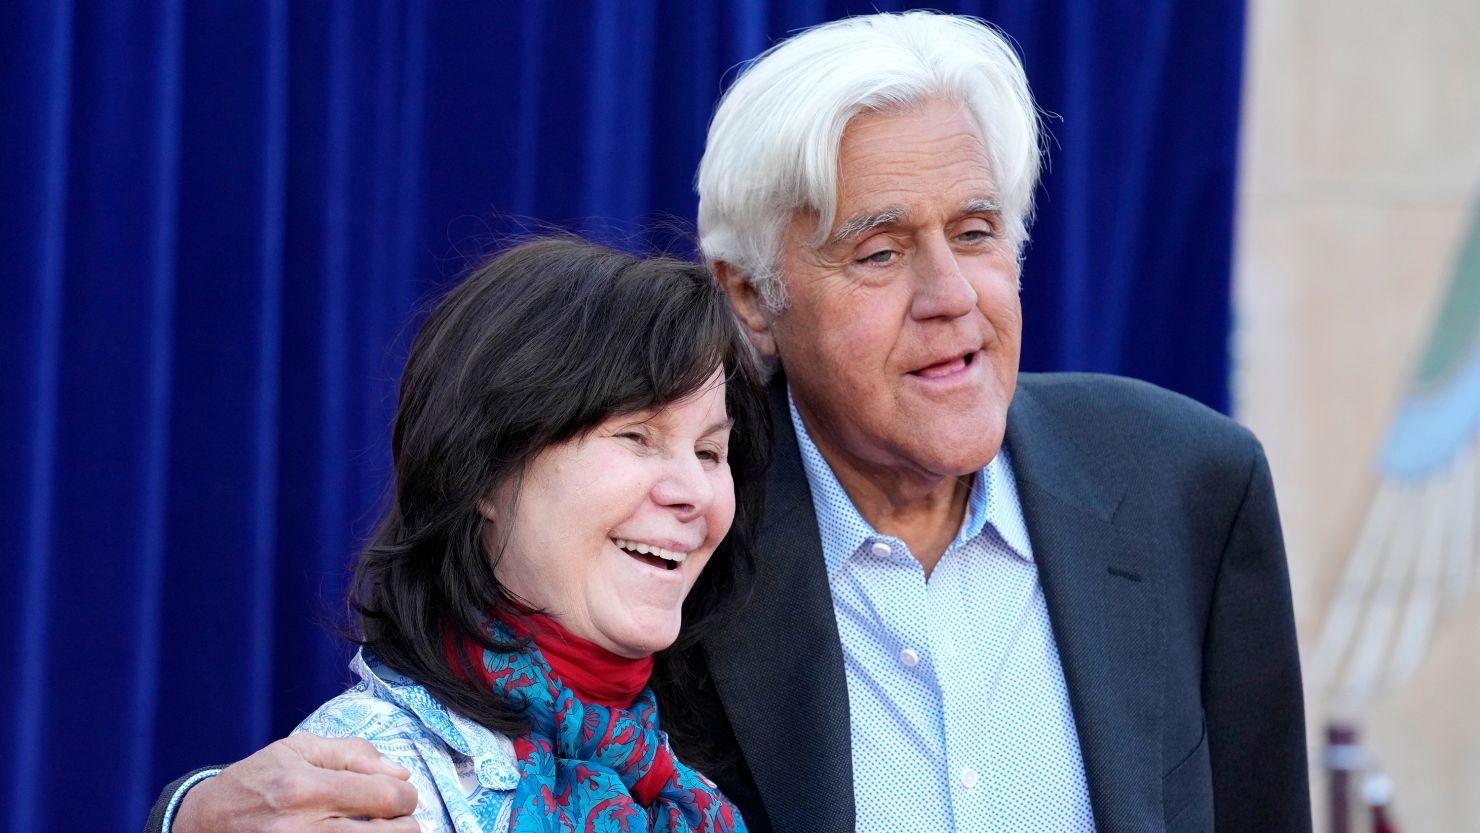 Jay Leno, right, and his wife Mavis pose together at the premiere of the Netflix film "Unfrosted" at the Egyptian Theatre on Tuesday.